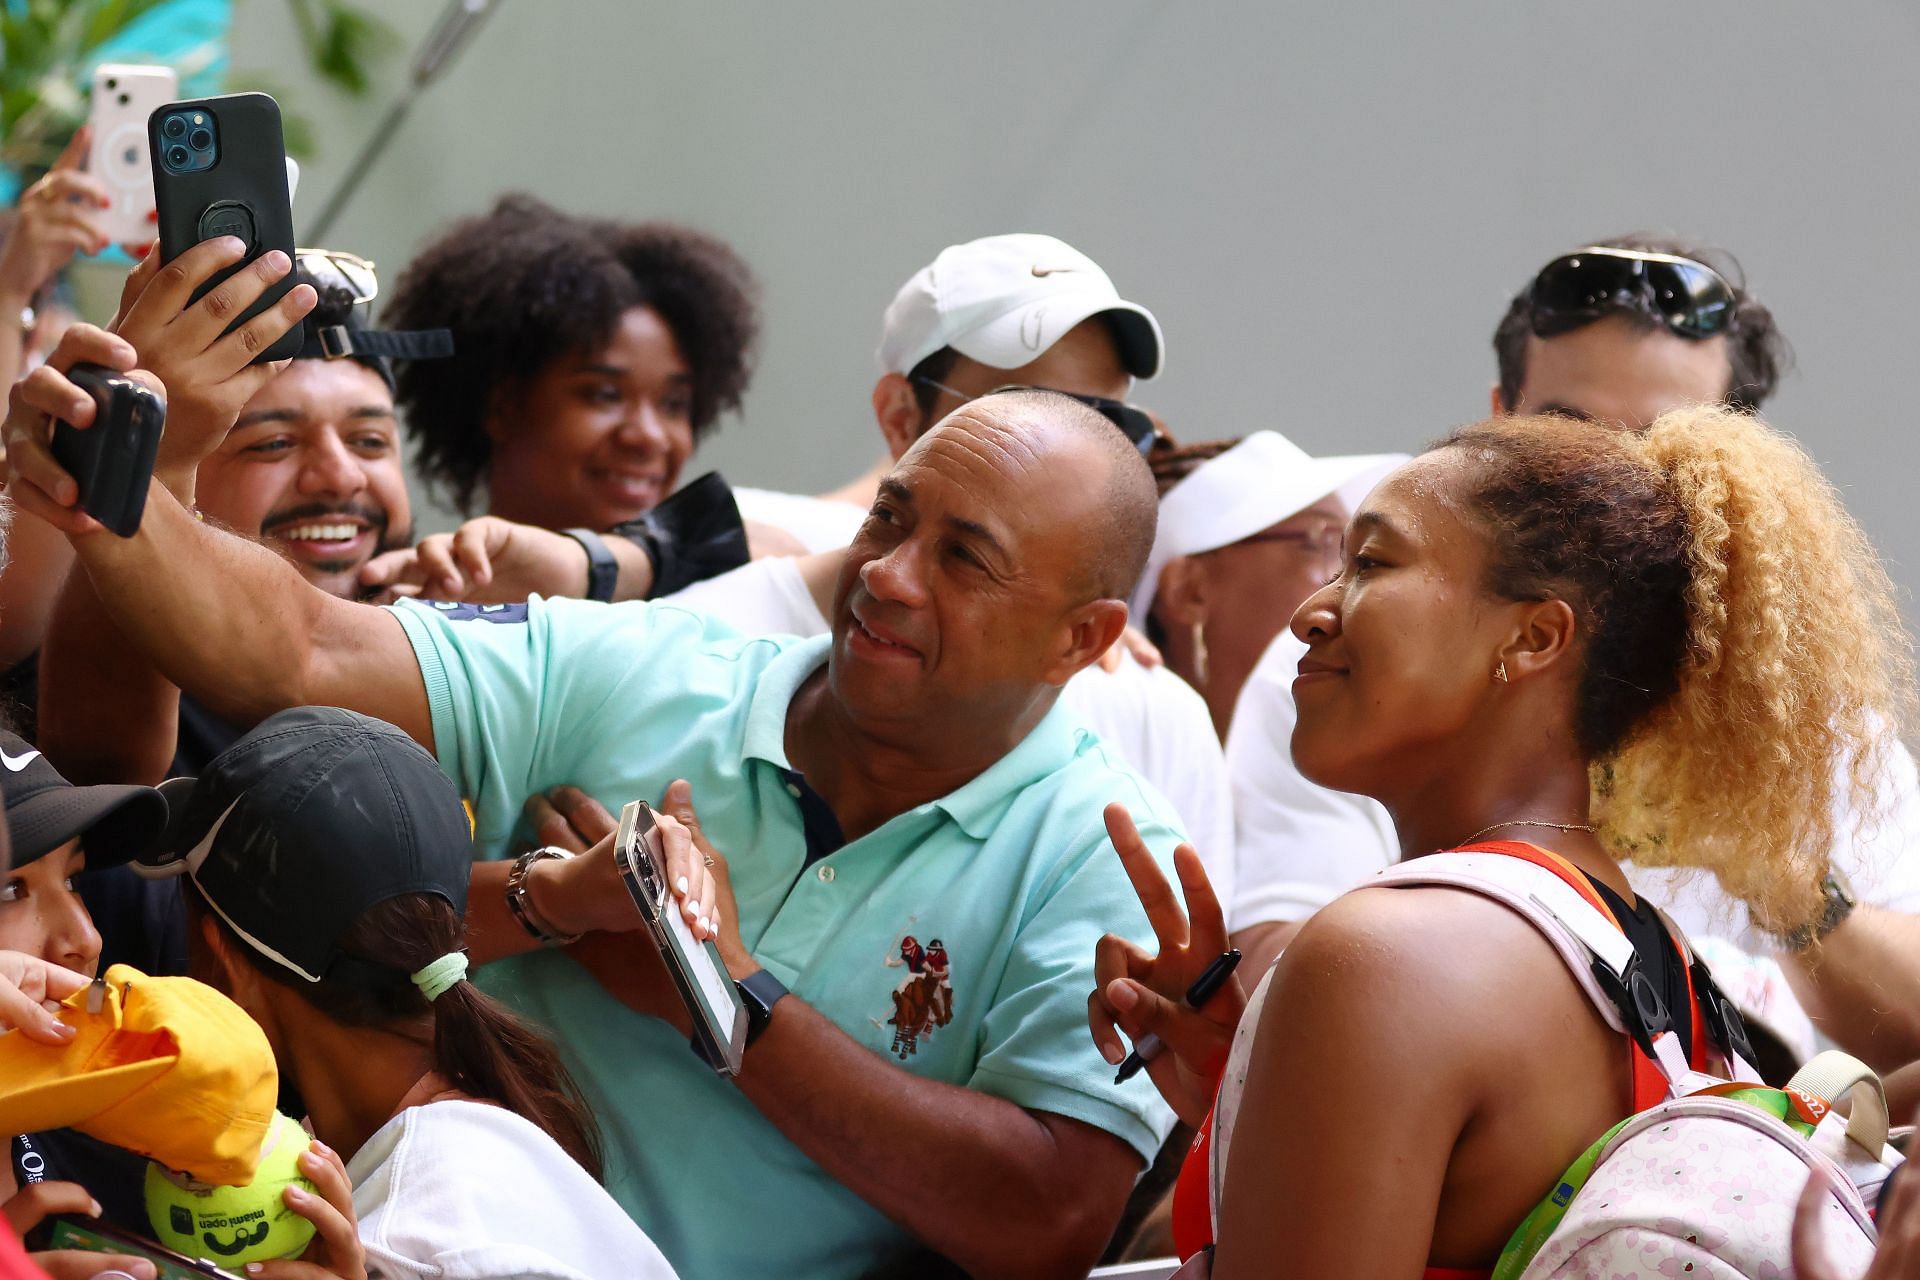 Naomi Osaka takes a selfie with a fan after her win against Belinda Bencic in the semifinals of the 2022 Miami Open.